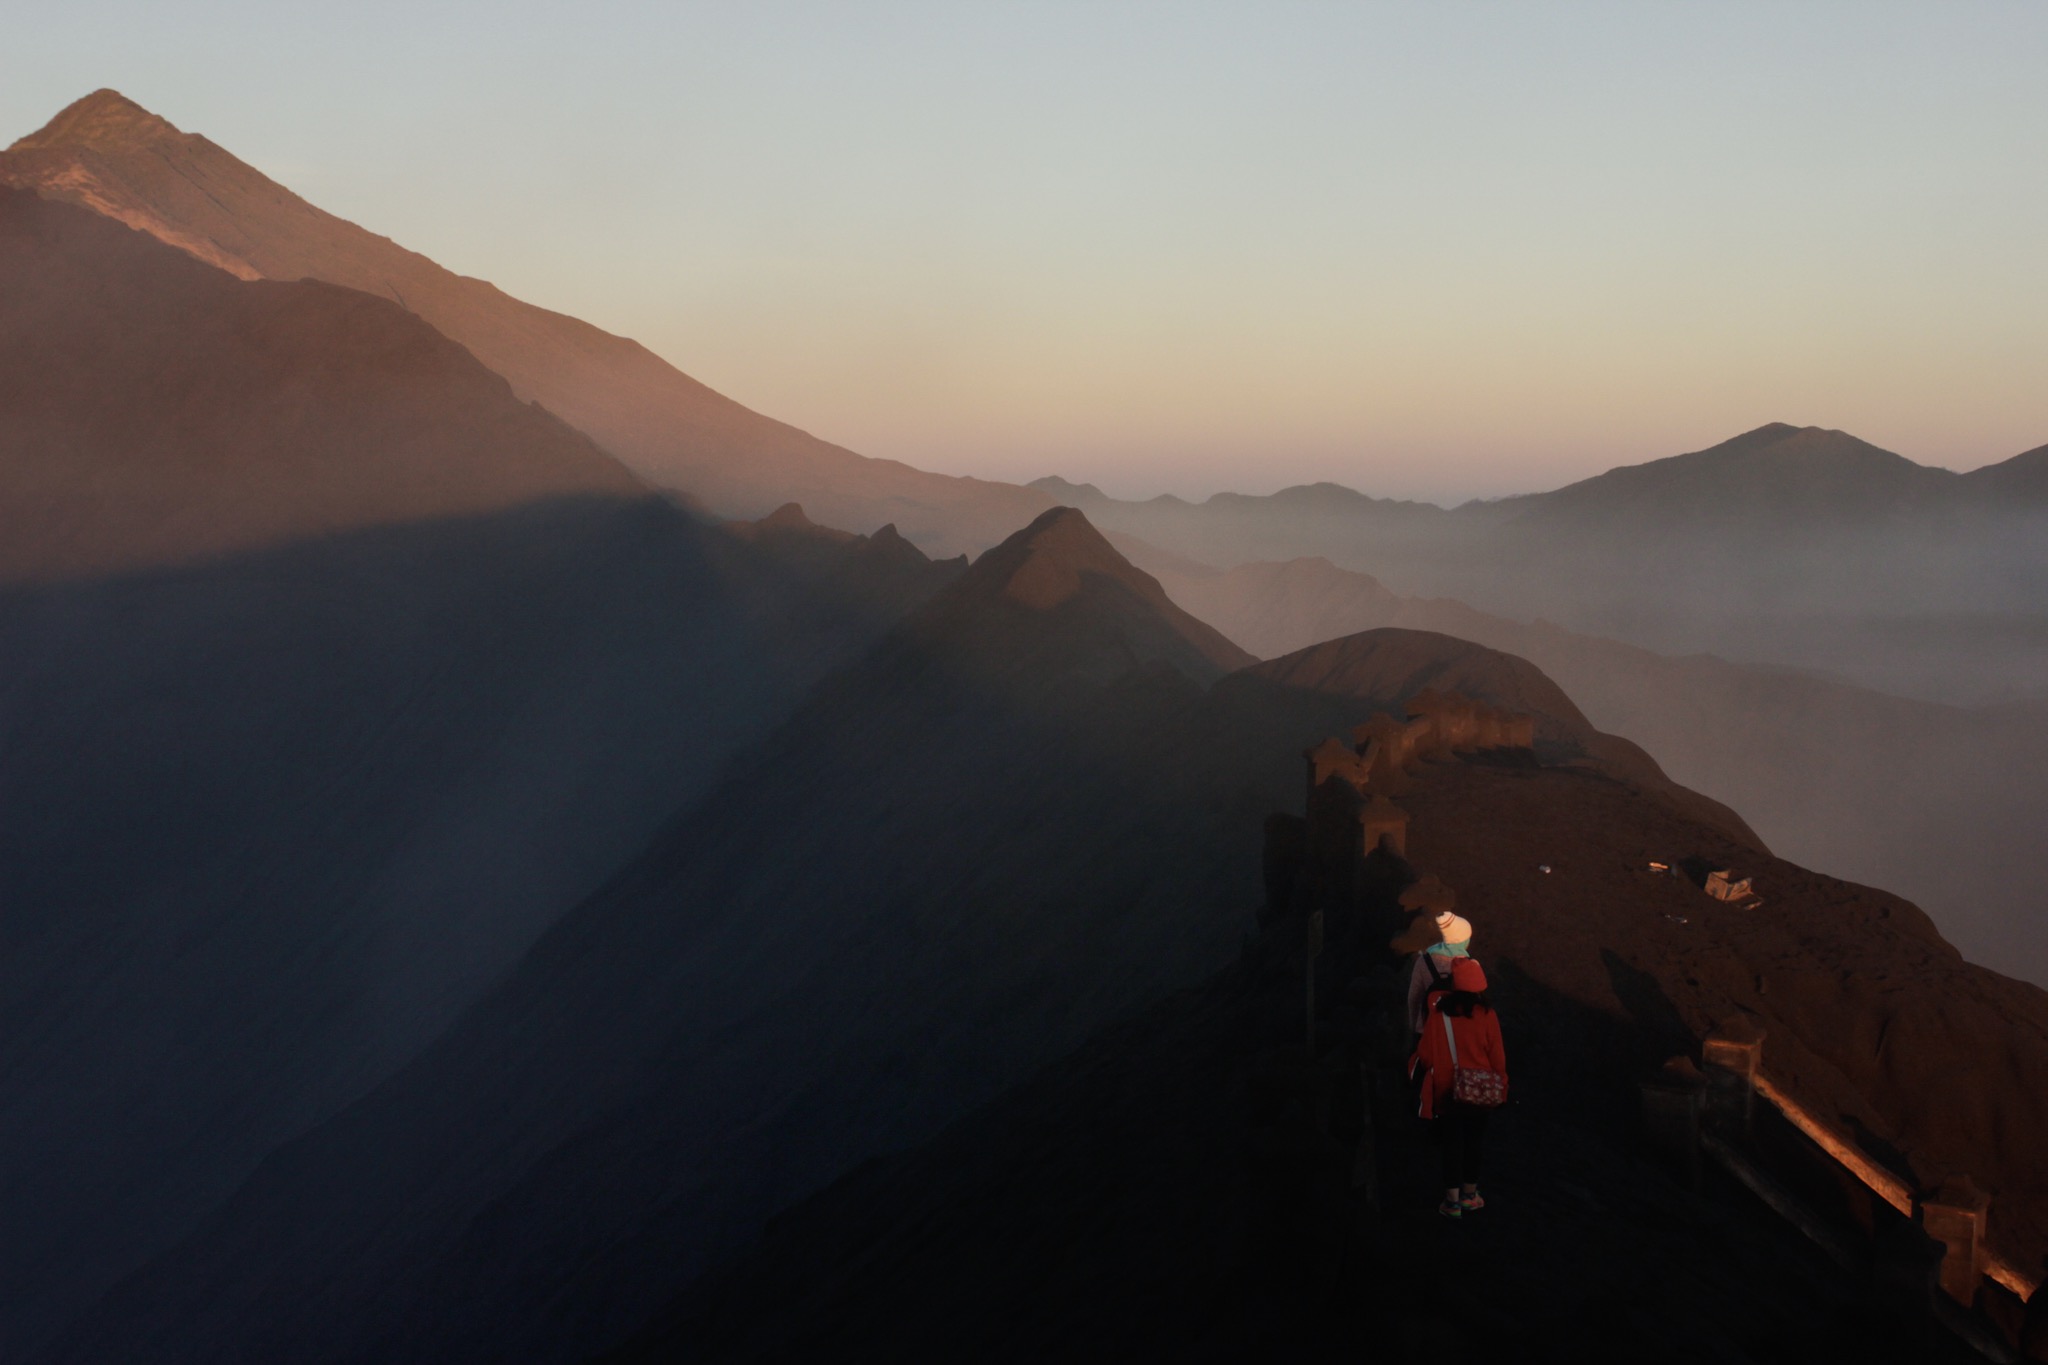 The Indonesian island of Java is almost entirely of volcanic origin, contains numerous volcanoes, Mount Bromo is one of those 45 volcanoes which are considered active (In frame: tourist walks on edge of crater rim to find best spot for experiencing sunrise)